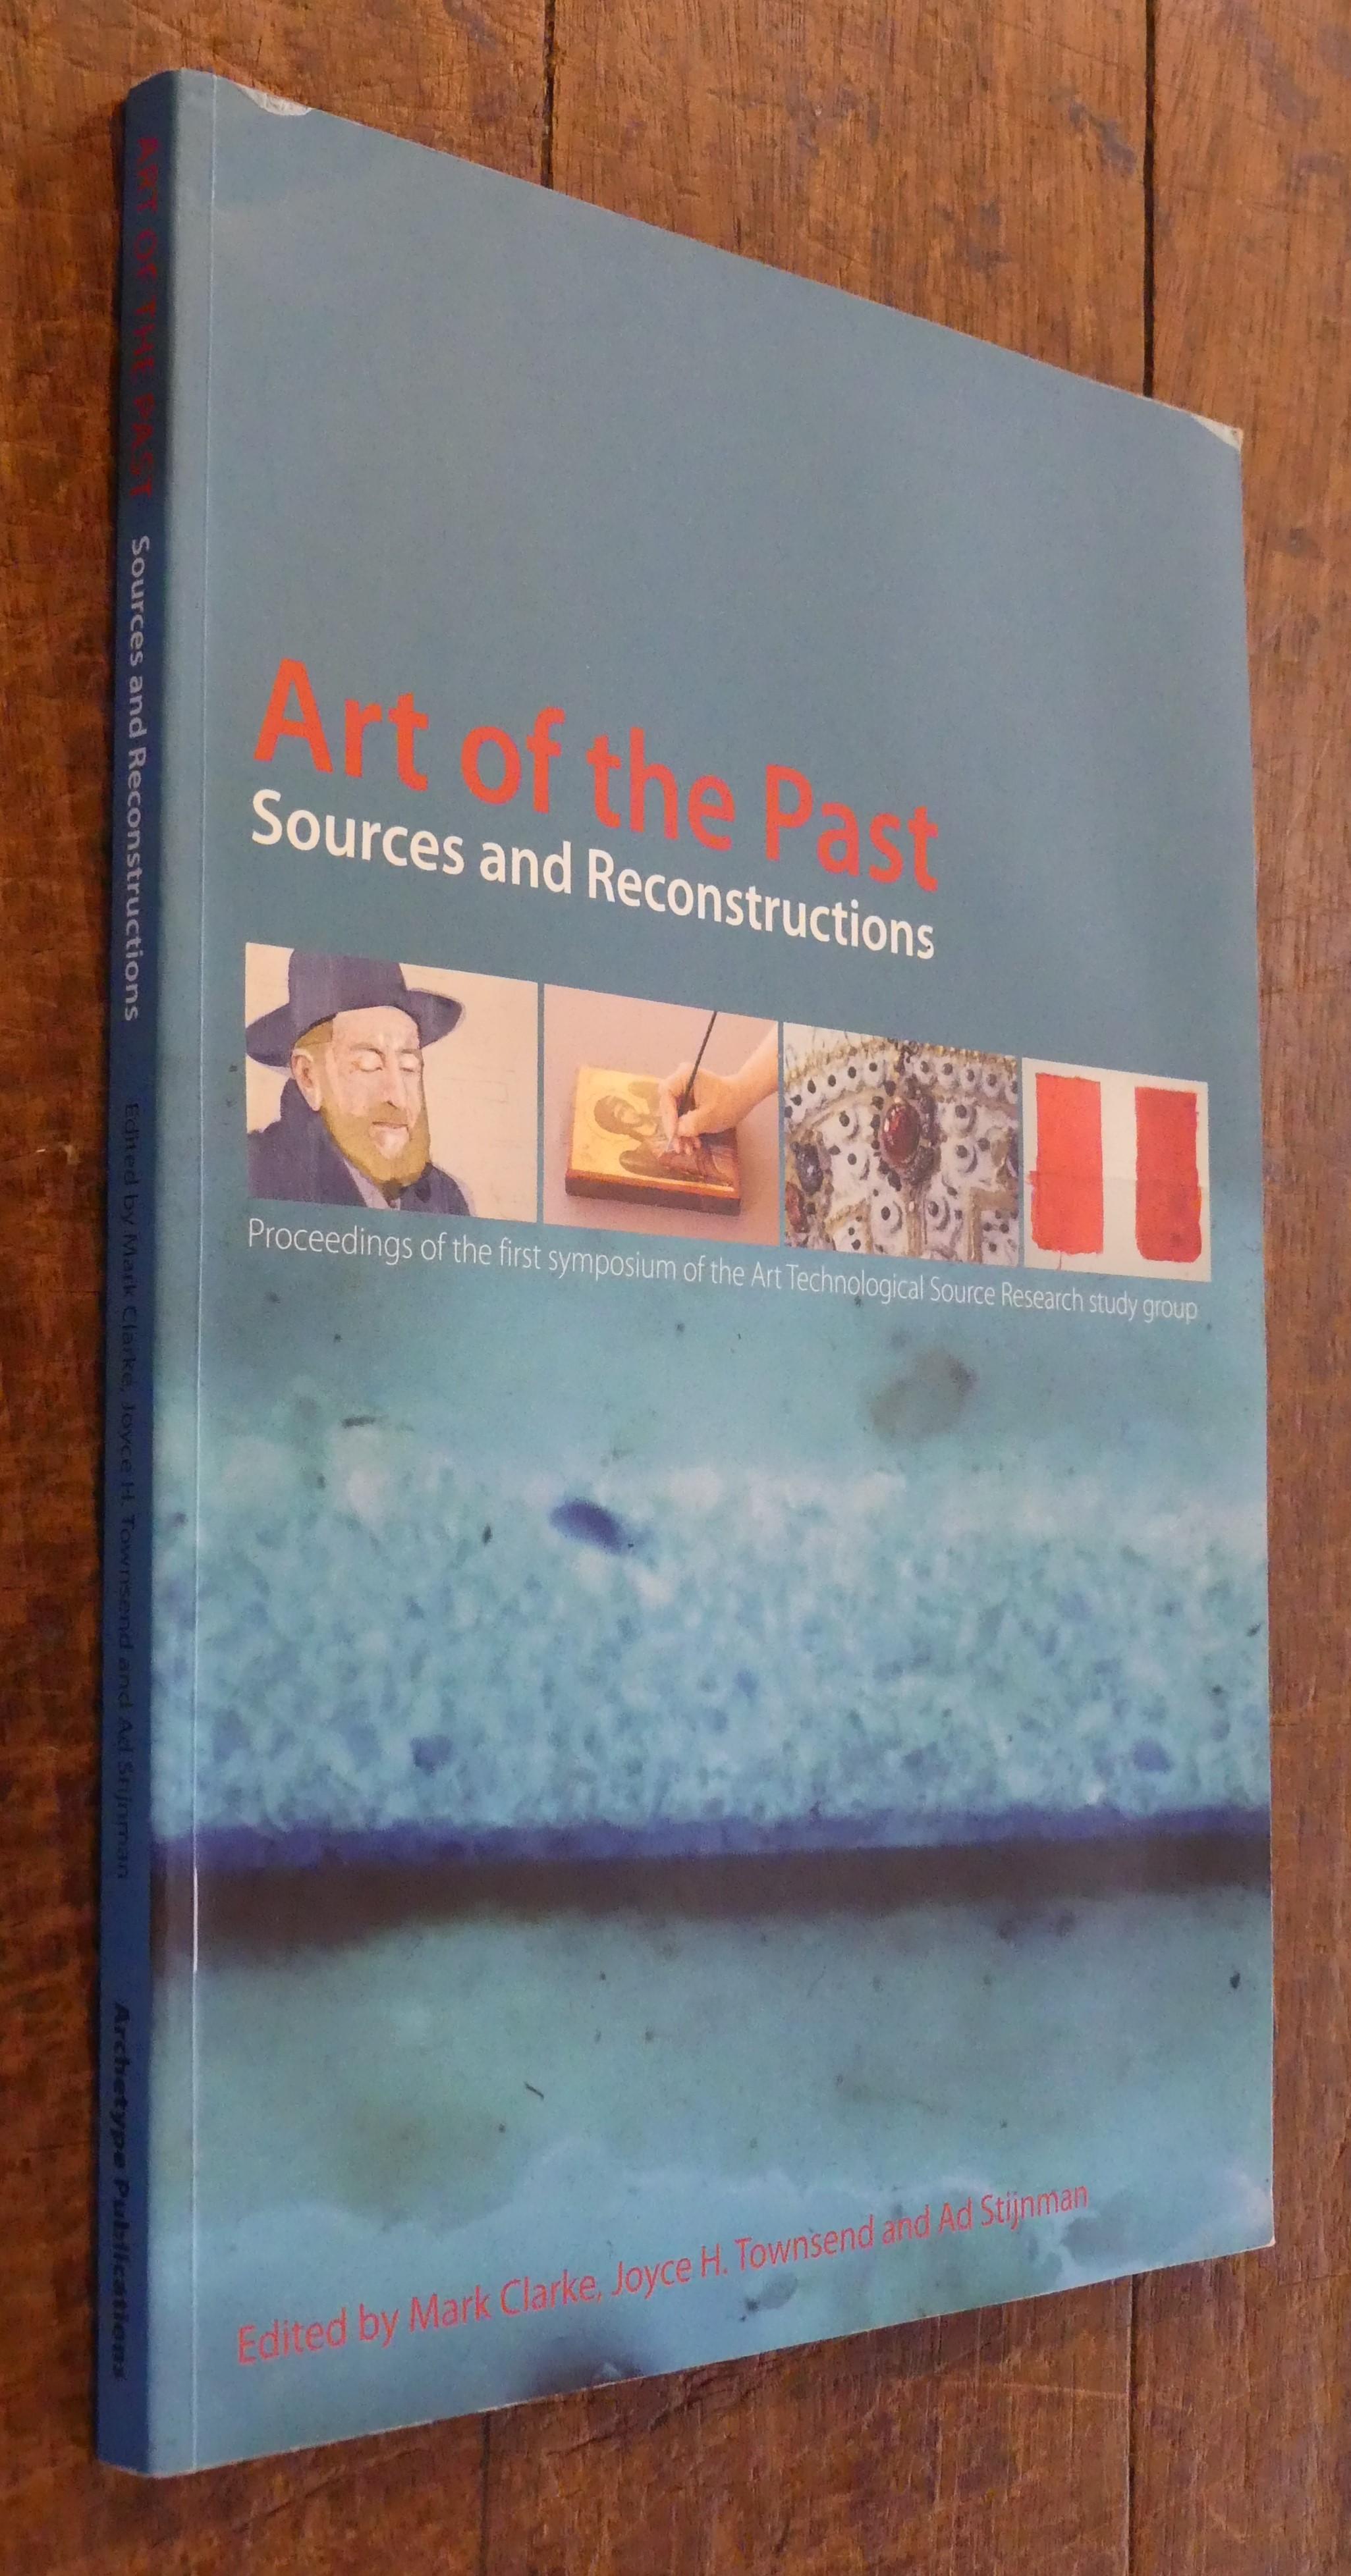 Art of the Past Sources and Reconstructions Proceedings of the First Symposium of the Art Technological Source Research Study Group - Clarke, Mark,townshend, Joyce H., And Stijnman, Ad. (editors)